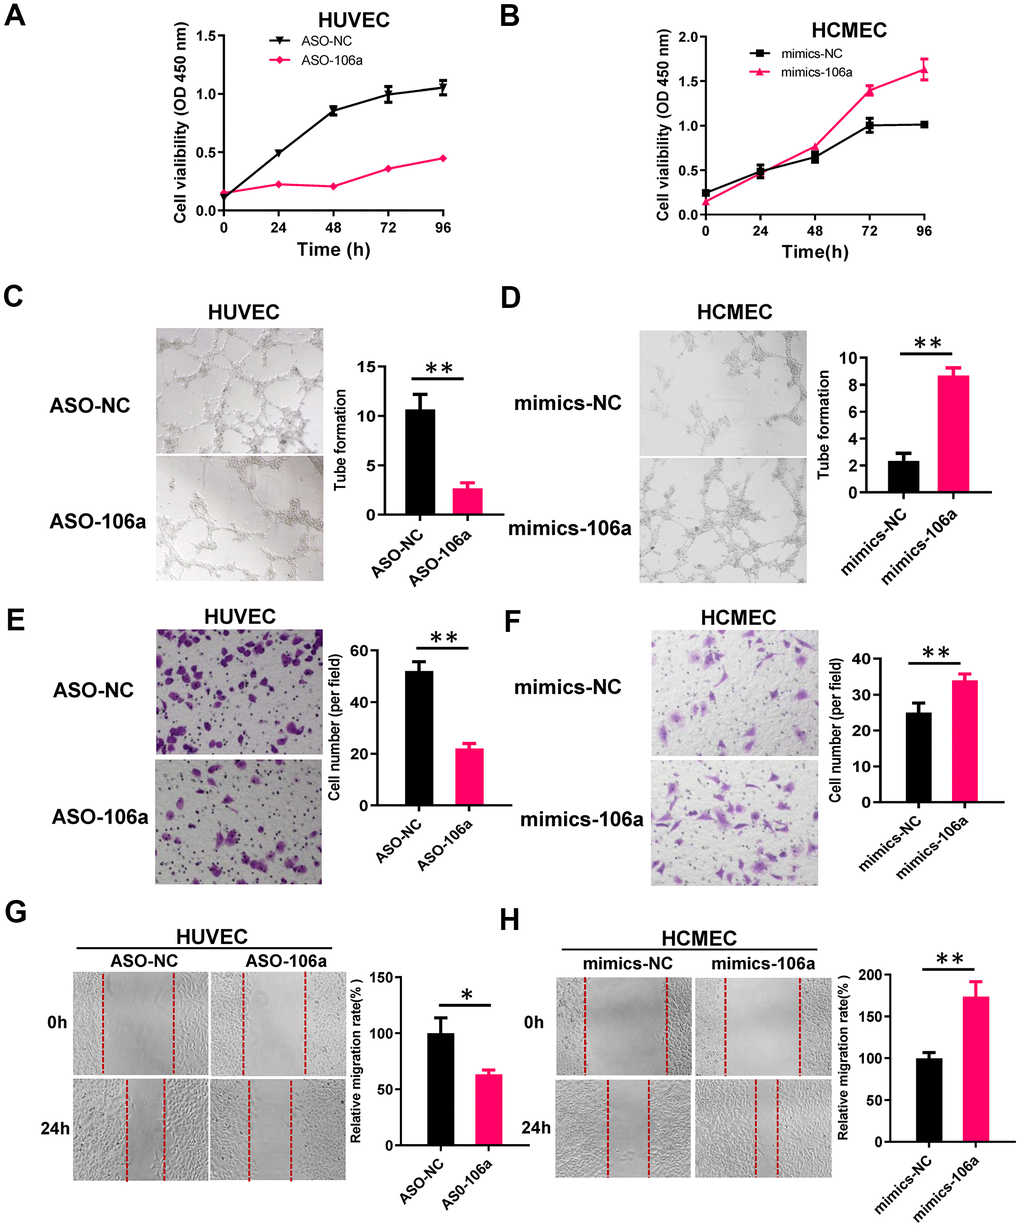 MiR-106a enhances the angiogenic abilities of endothelial cells. (A, B) CCK-8 assays were used to determine the growth curves of HUVECs transfected with ASO-106a or ASO-NC (A) and HCMECs transfected with mimics-106a or mimics-NC (B). (C, D) Tube formation was assessed in HUVECs transfected with ASO-106a or ASO-NC (C) and HCMECs transfected with mimics-106a or mimics-NC (D). (E, F) Transwell chambers were used to perform cell migration assays in HUVECs transfected with ASO-106a or ASO-NC (E) and HCMECs transfected with mimics-106a or mimics-NC (F). (G, H) Wound healing assays were performed to assess cell motility in HUVECs transfected with ASO-106a or ASO-NC (G) and HCMECs transfected with mimics-106a or mimics-NC (H). Data are presented as the mean of three experiments, and the error bars represent the SD (*P